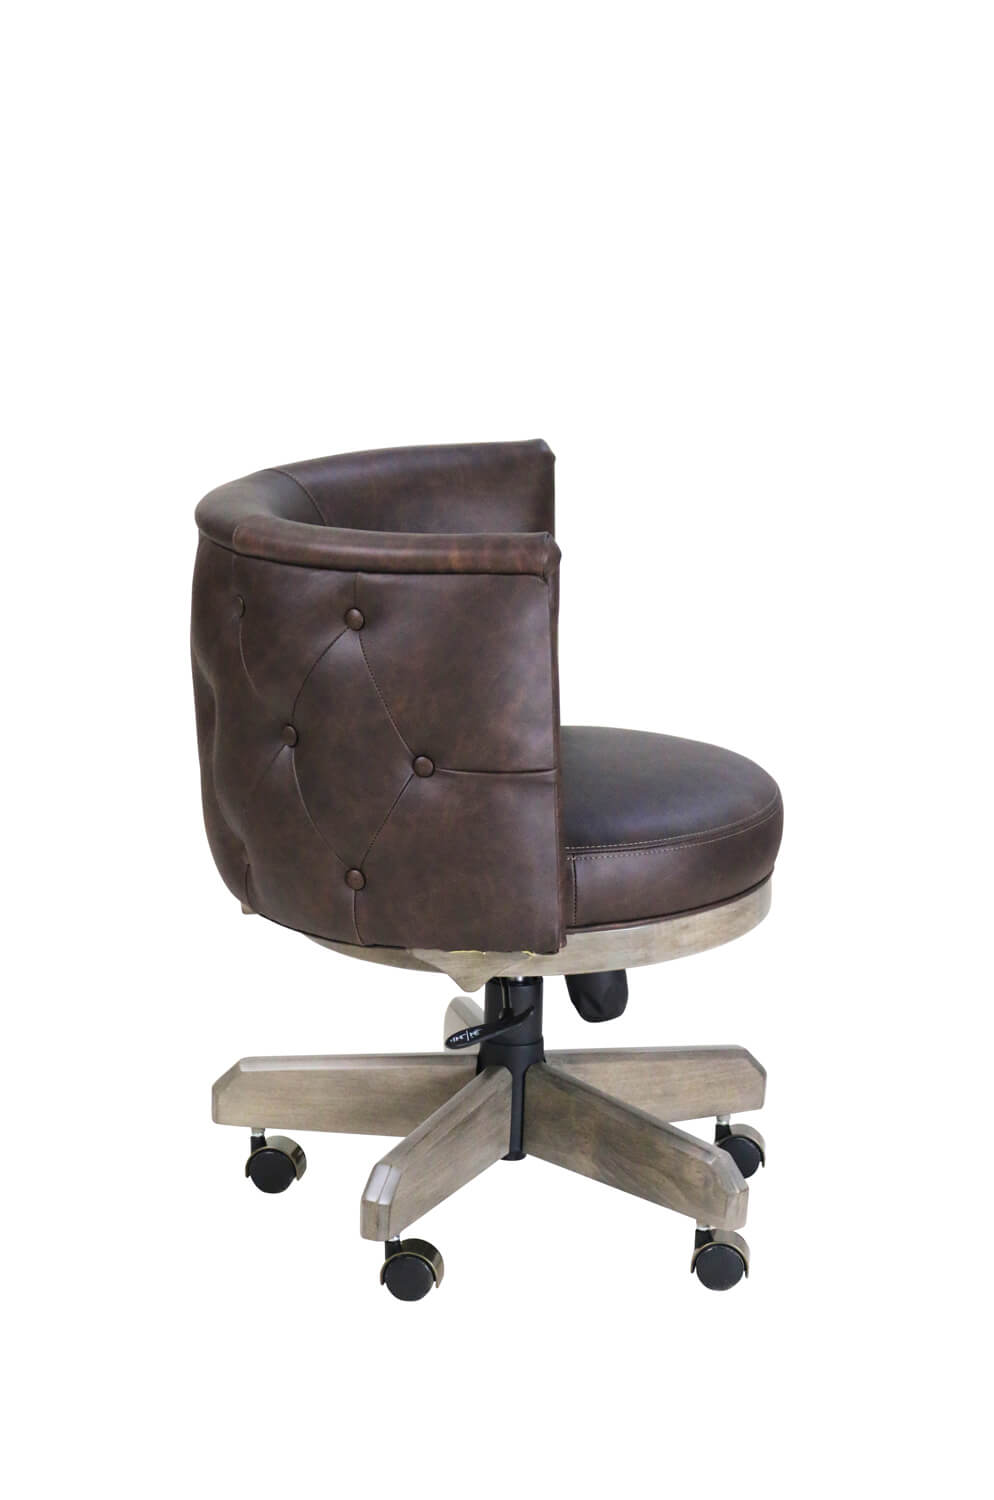 Darafeev's Chesterfield Wood Swivel Game Chair with Upholstered Back and Seat in Leather - Side View